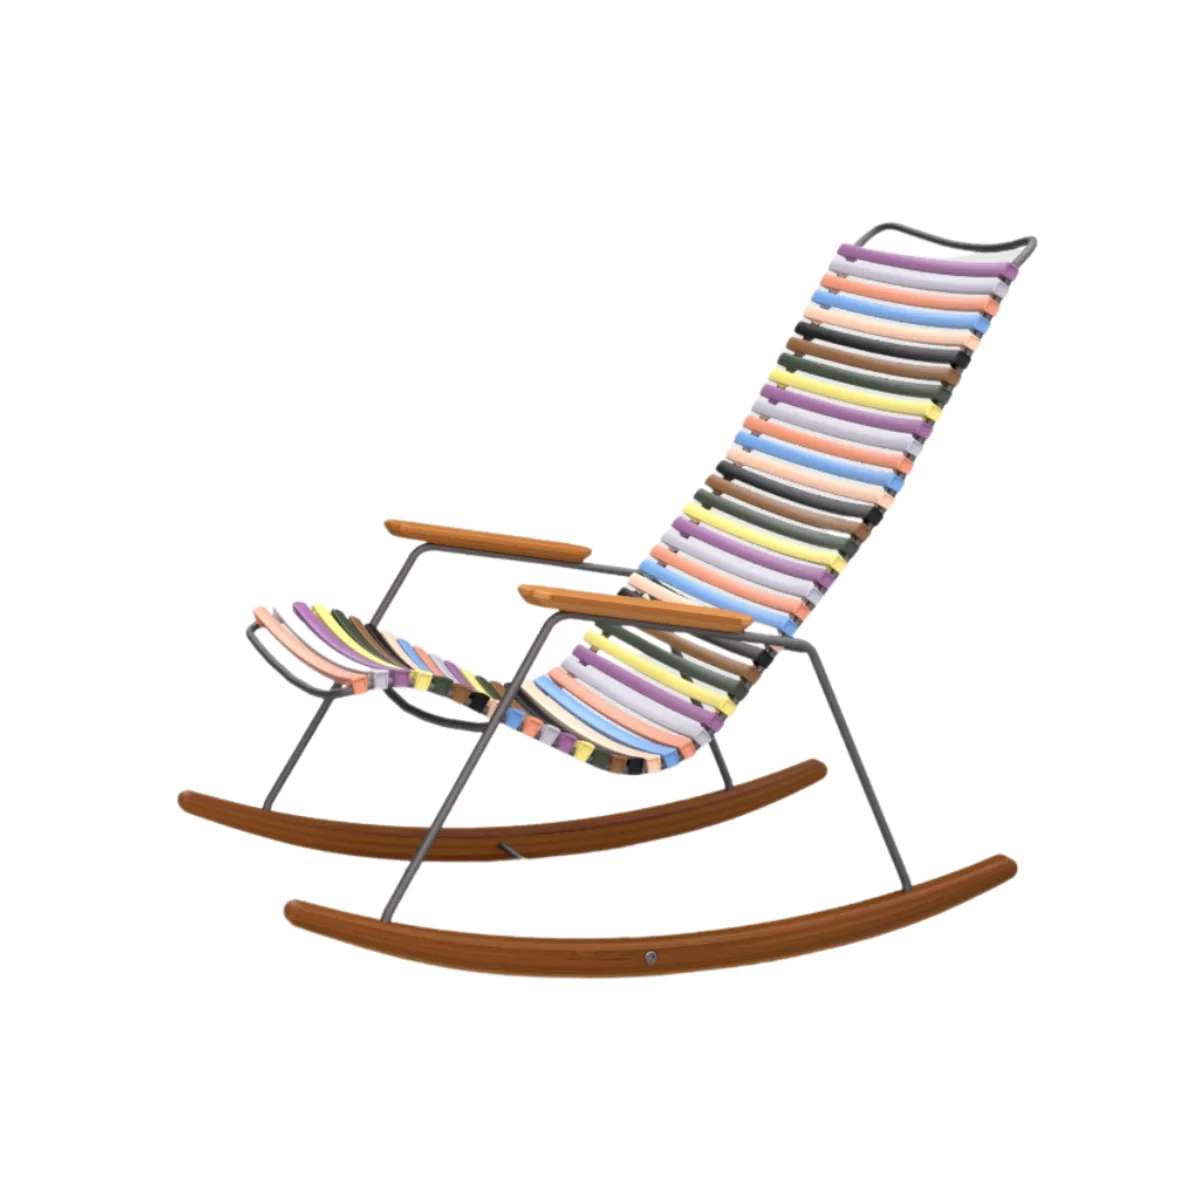 Crackle rocking chair 1